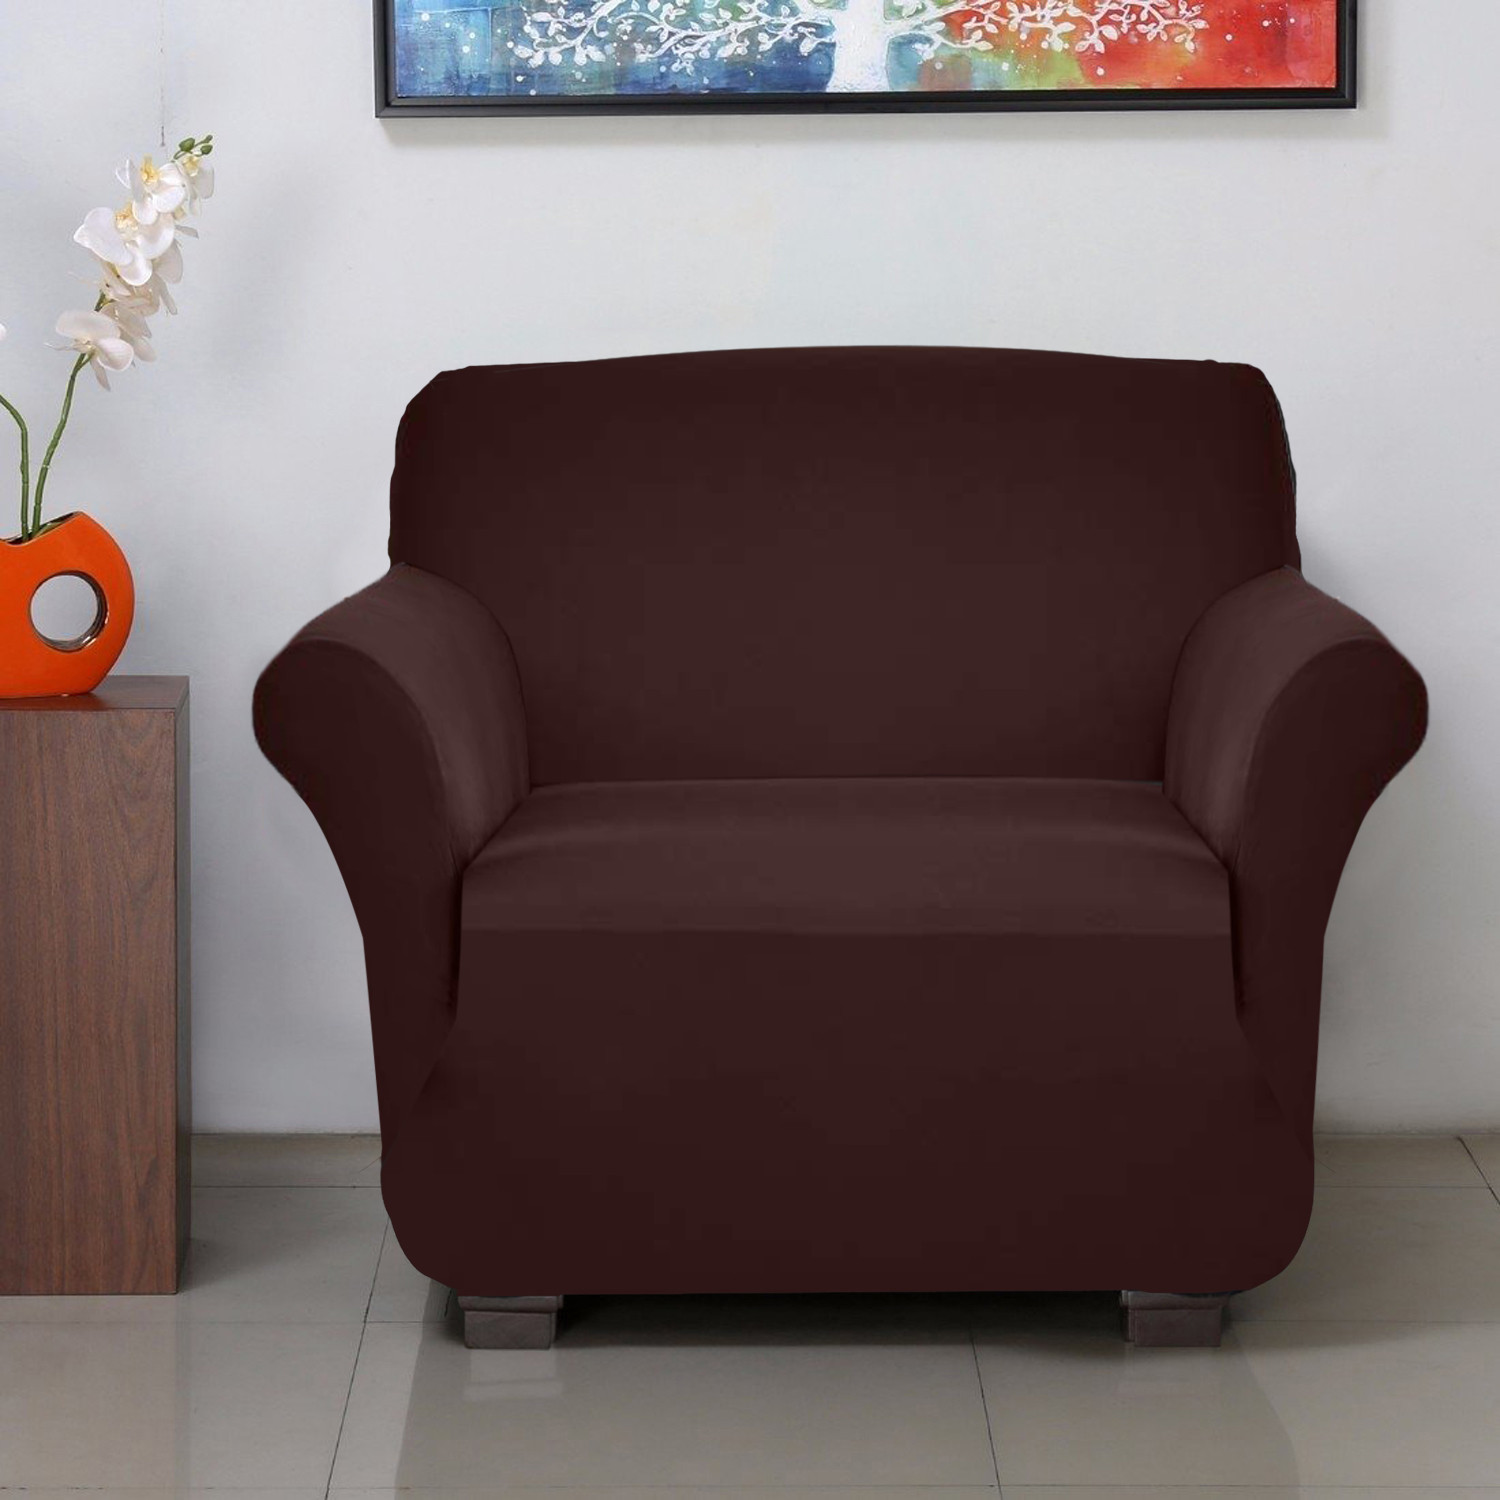 Kuber Industries Stretchable, Non-Slip Polyster Single Seater Sofa Cover/Slipcover/Protector With Foam Stick (Brown)